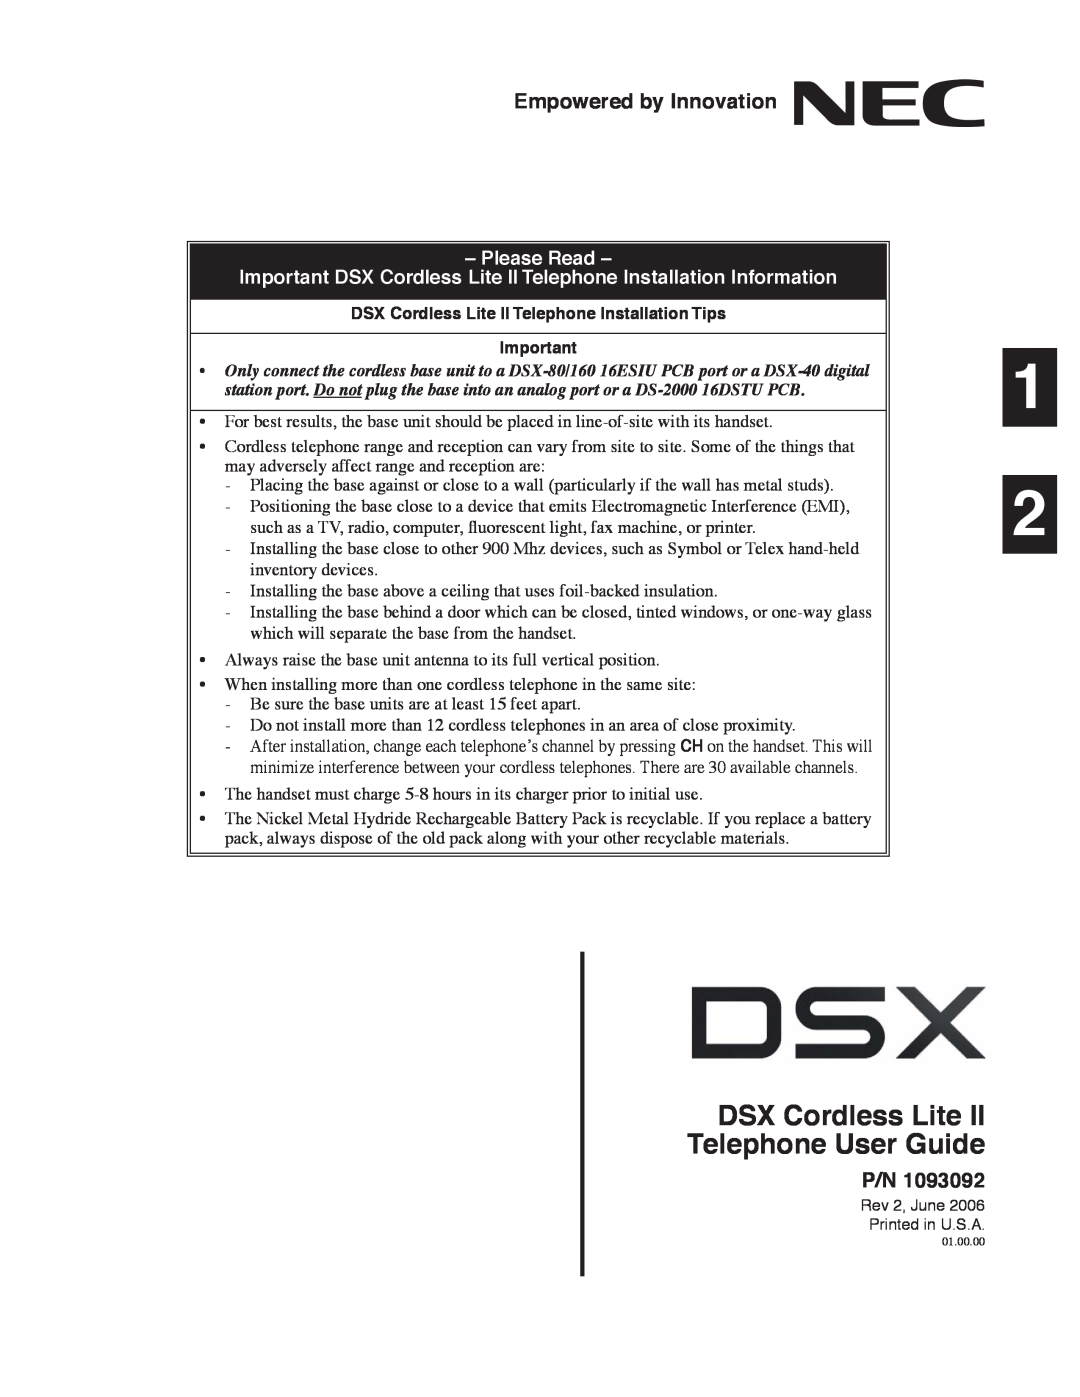 NEC N 1093092 manual DSX Cordless Lite II Telephone User Guide, Empowered by Innovation, Please Read 